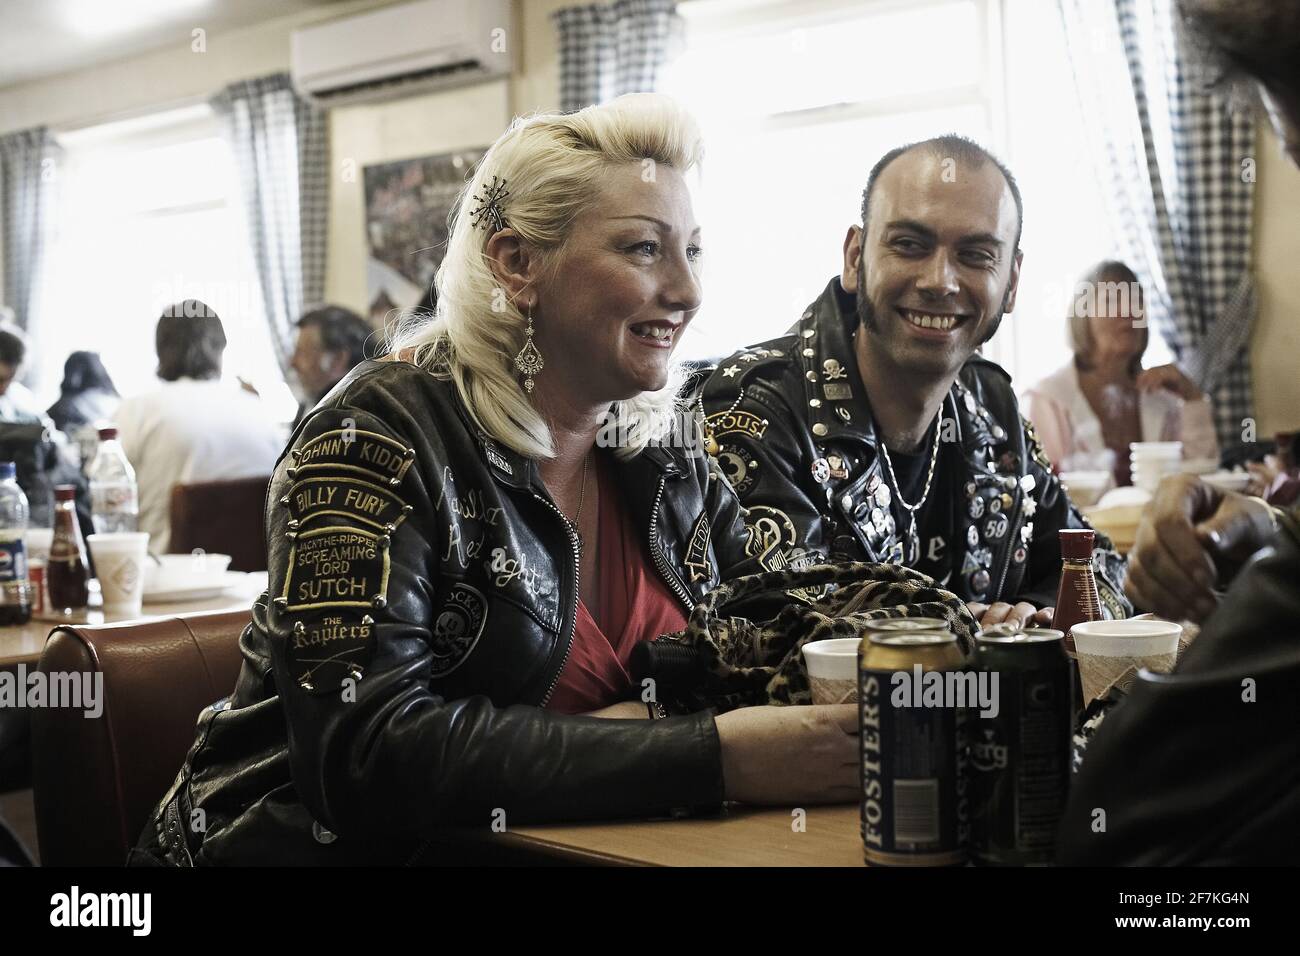 Rocker couple wearing leather jackets patches and badges drinking beer in Jacks Hill Cafe, Northamptonshire, England. Stock Photo